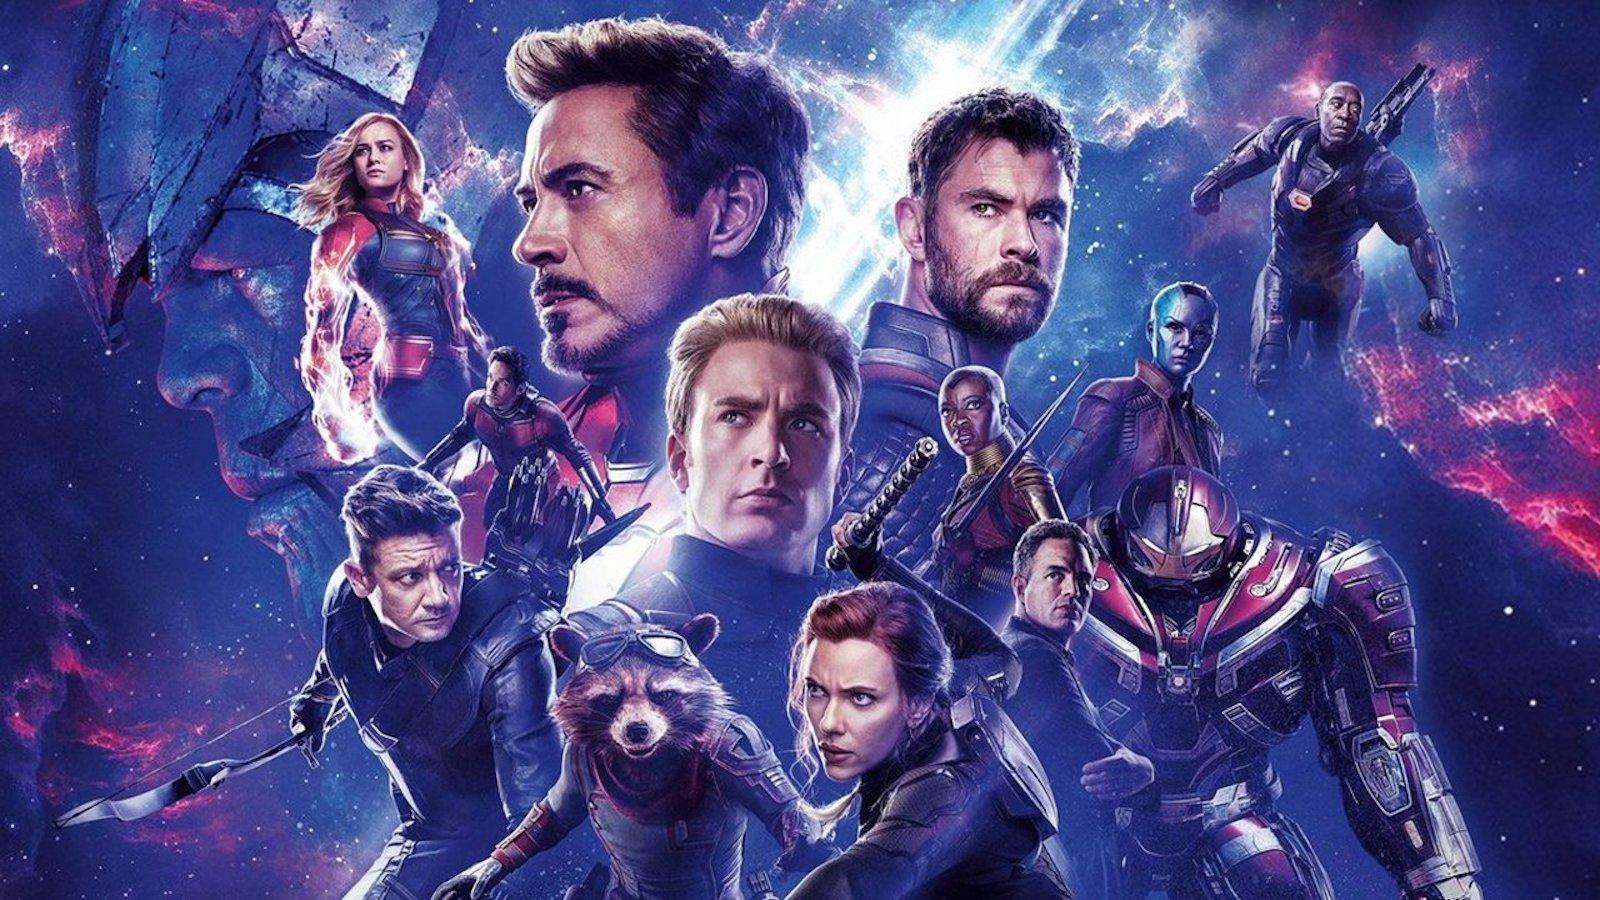 Poster for the MCU's Avengers: Endgame